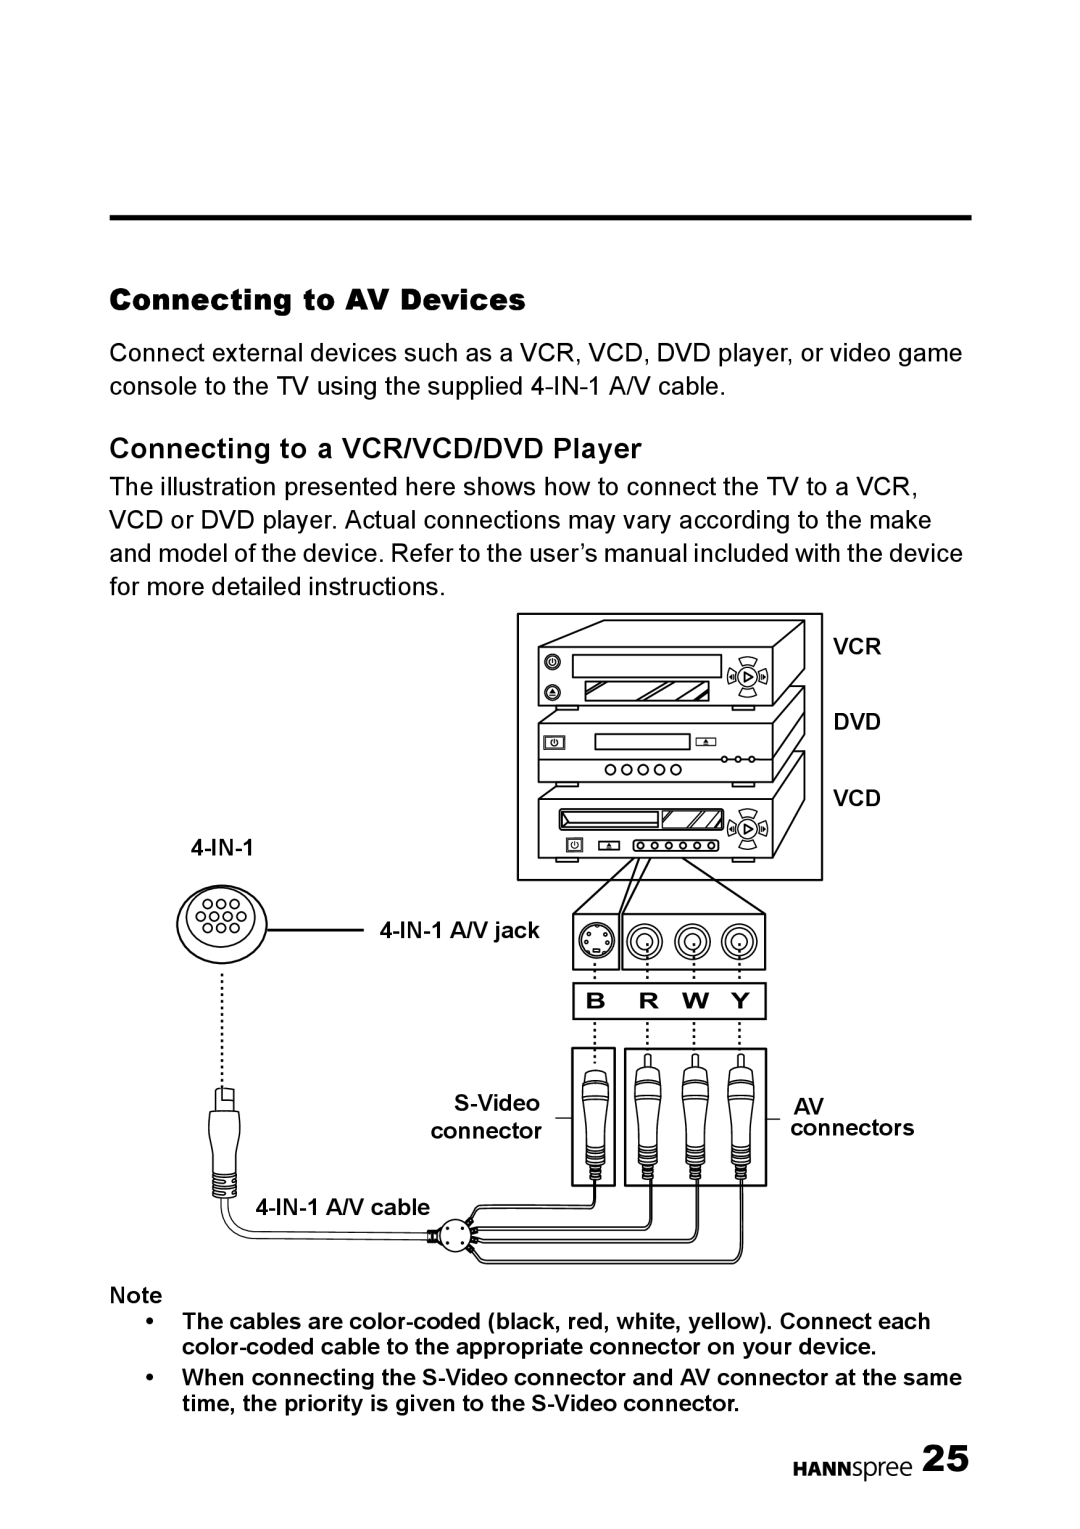 HANNspree HANNSz.crab user manual Connecting to AV Devices, Connecting to a VCR/VCD/DVD Player 